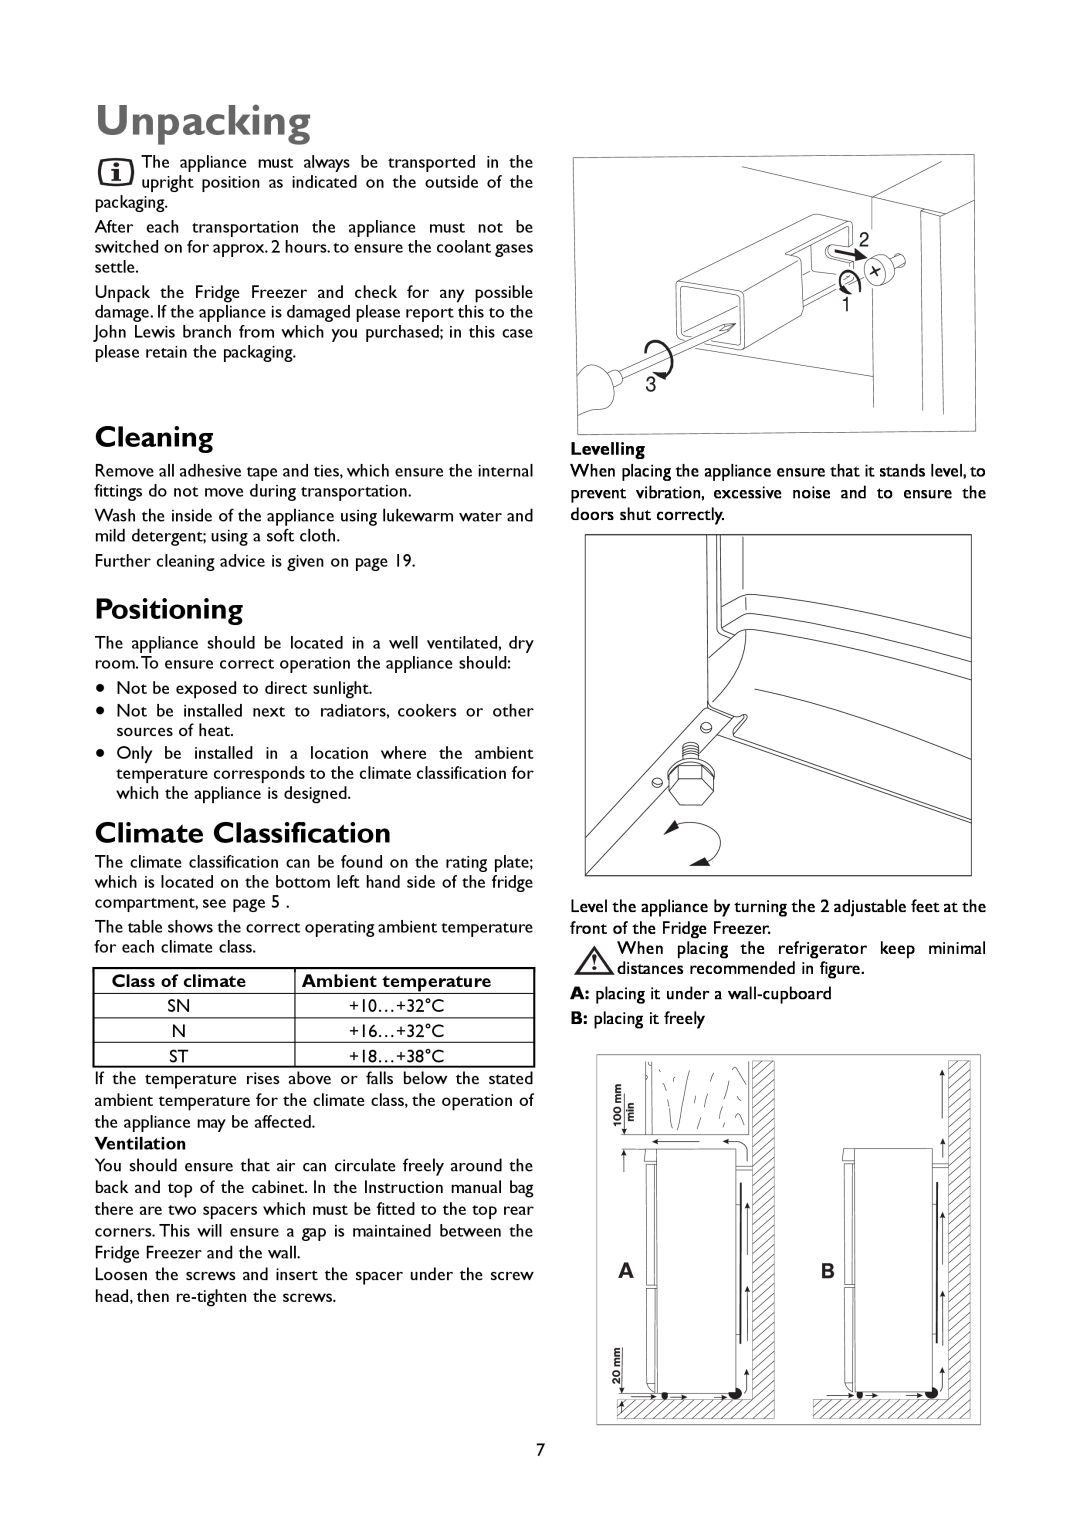 John Lewis JLFFW1807, JLSS1808 instruction manual Unpacking, Cleaning, Positioning, Climate Classification 